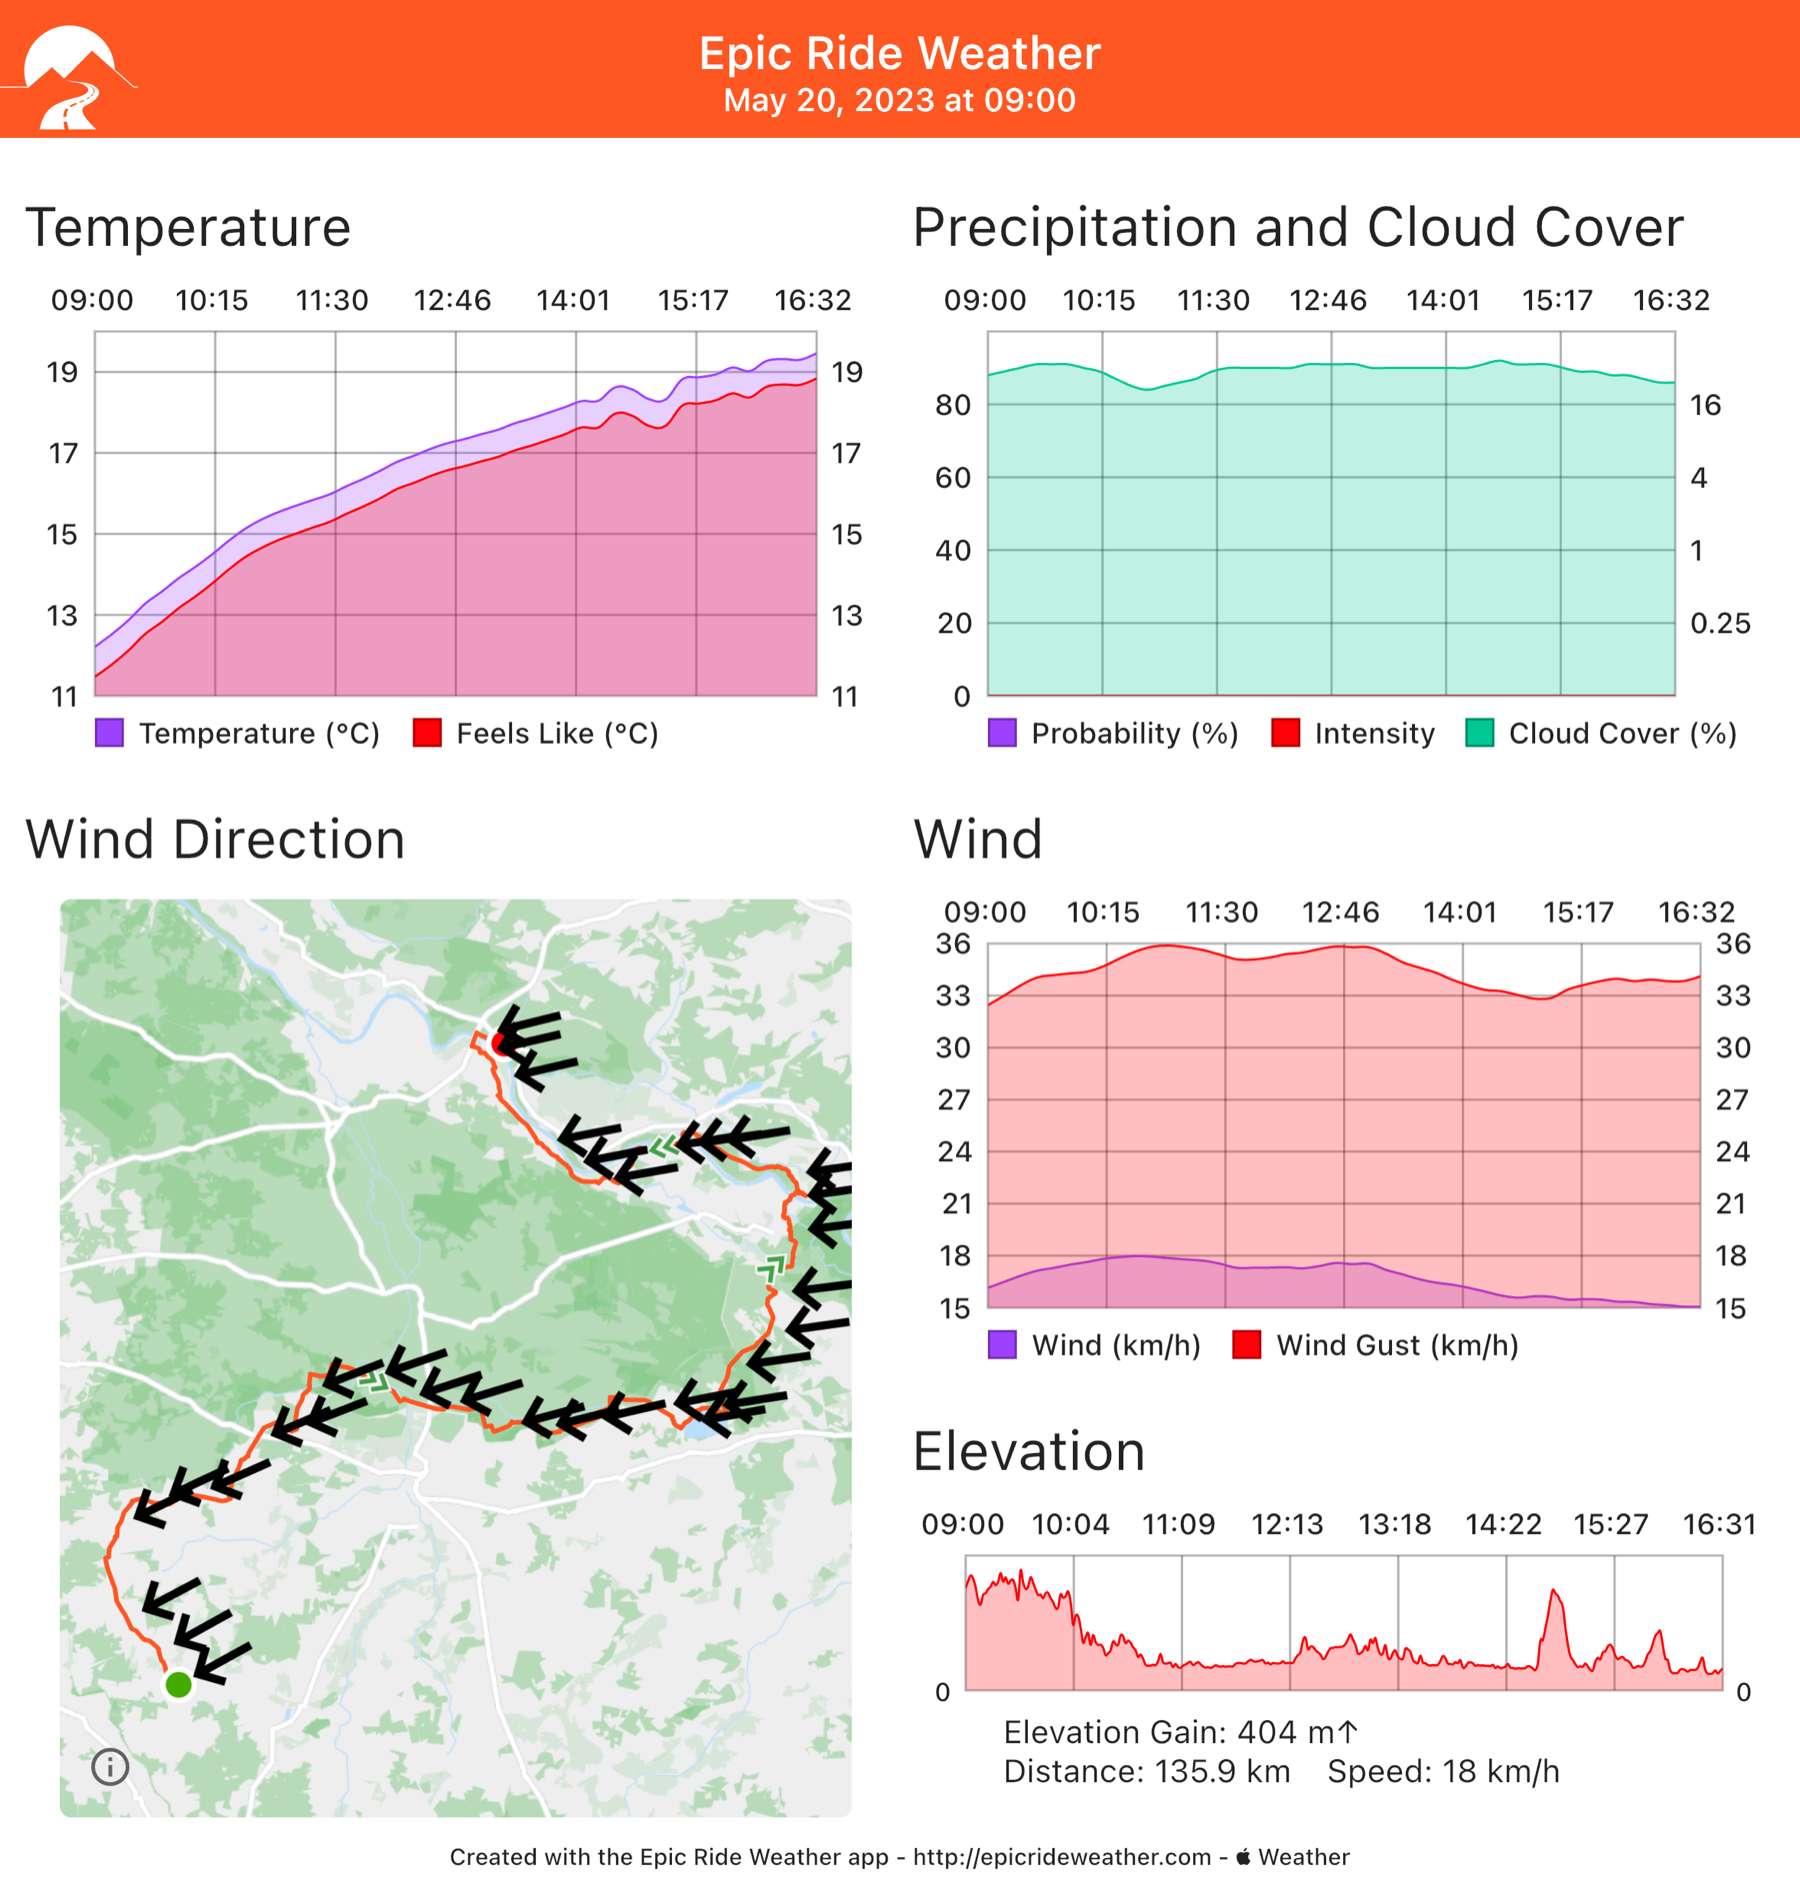 Epic Weather Ride weather forecast for the tour. Lots of headwind.